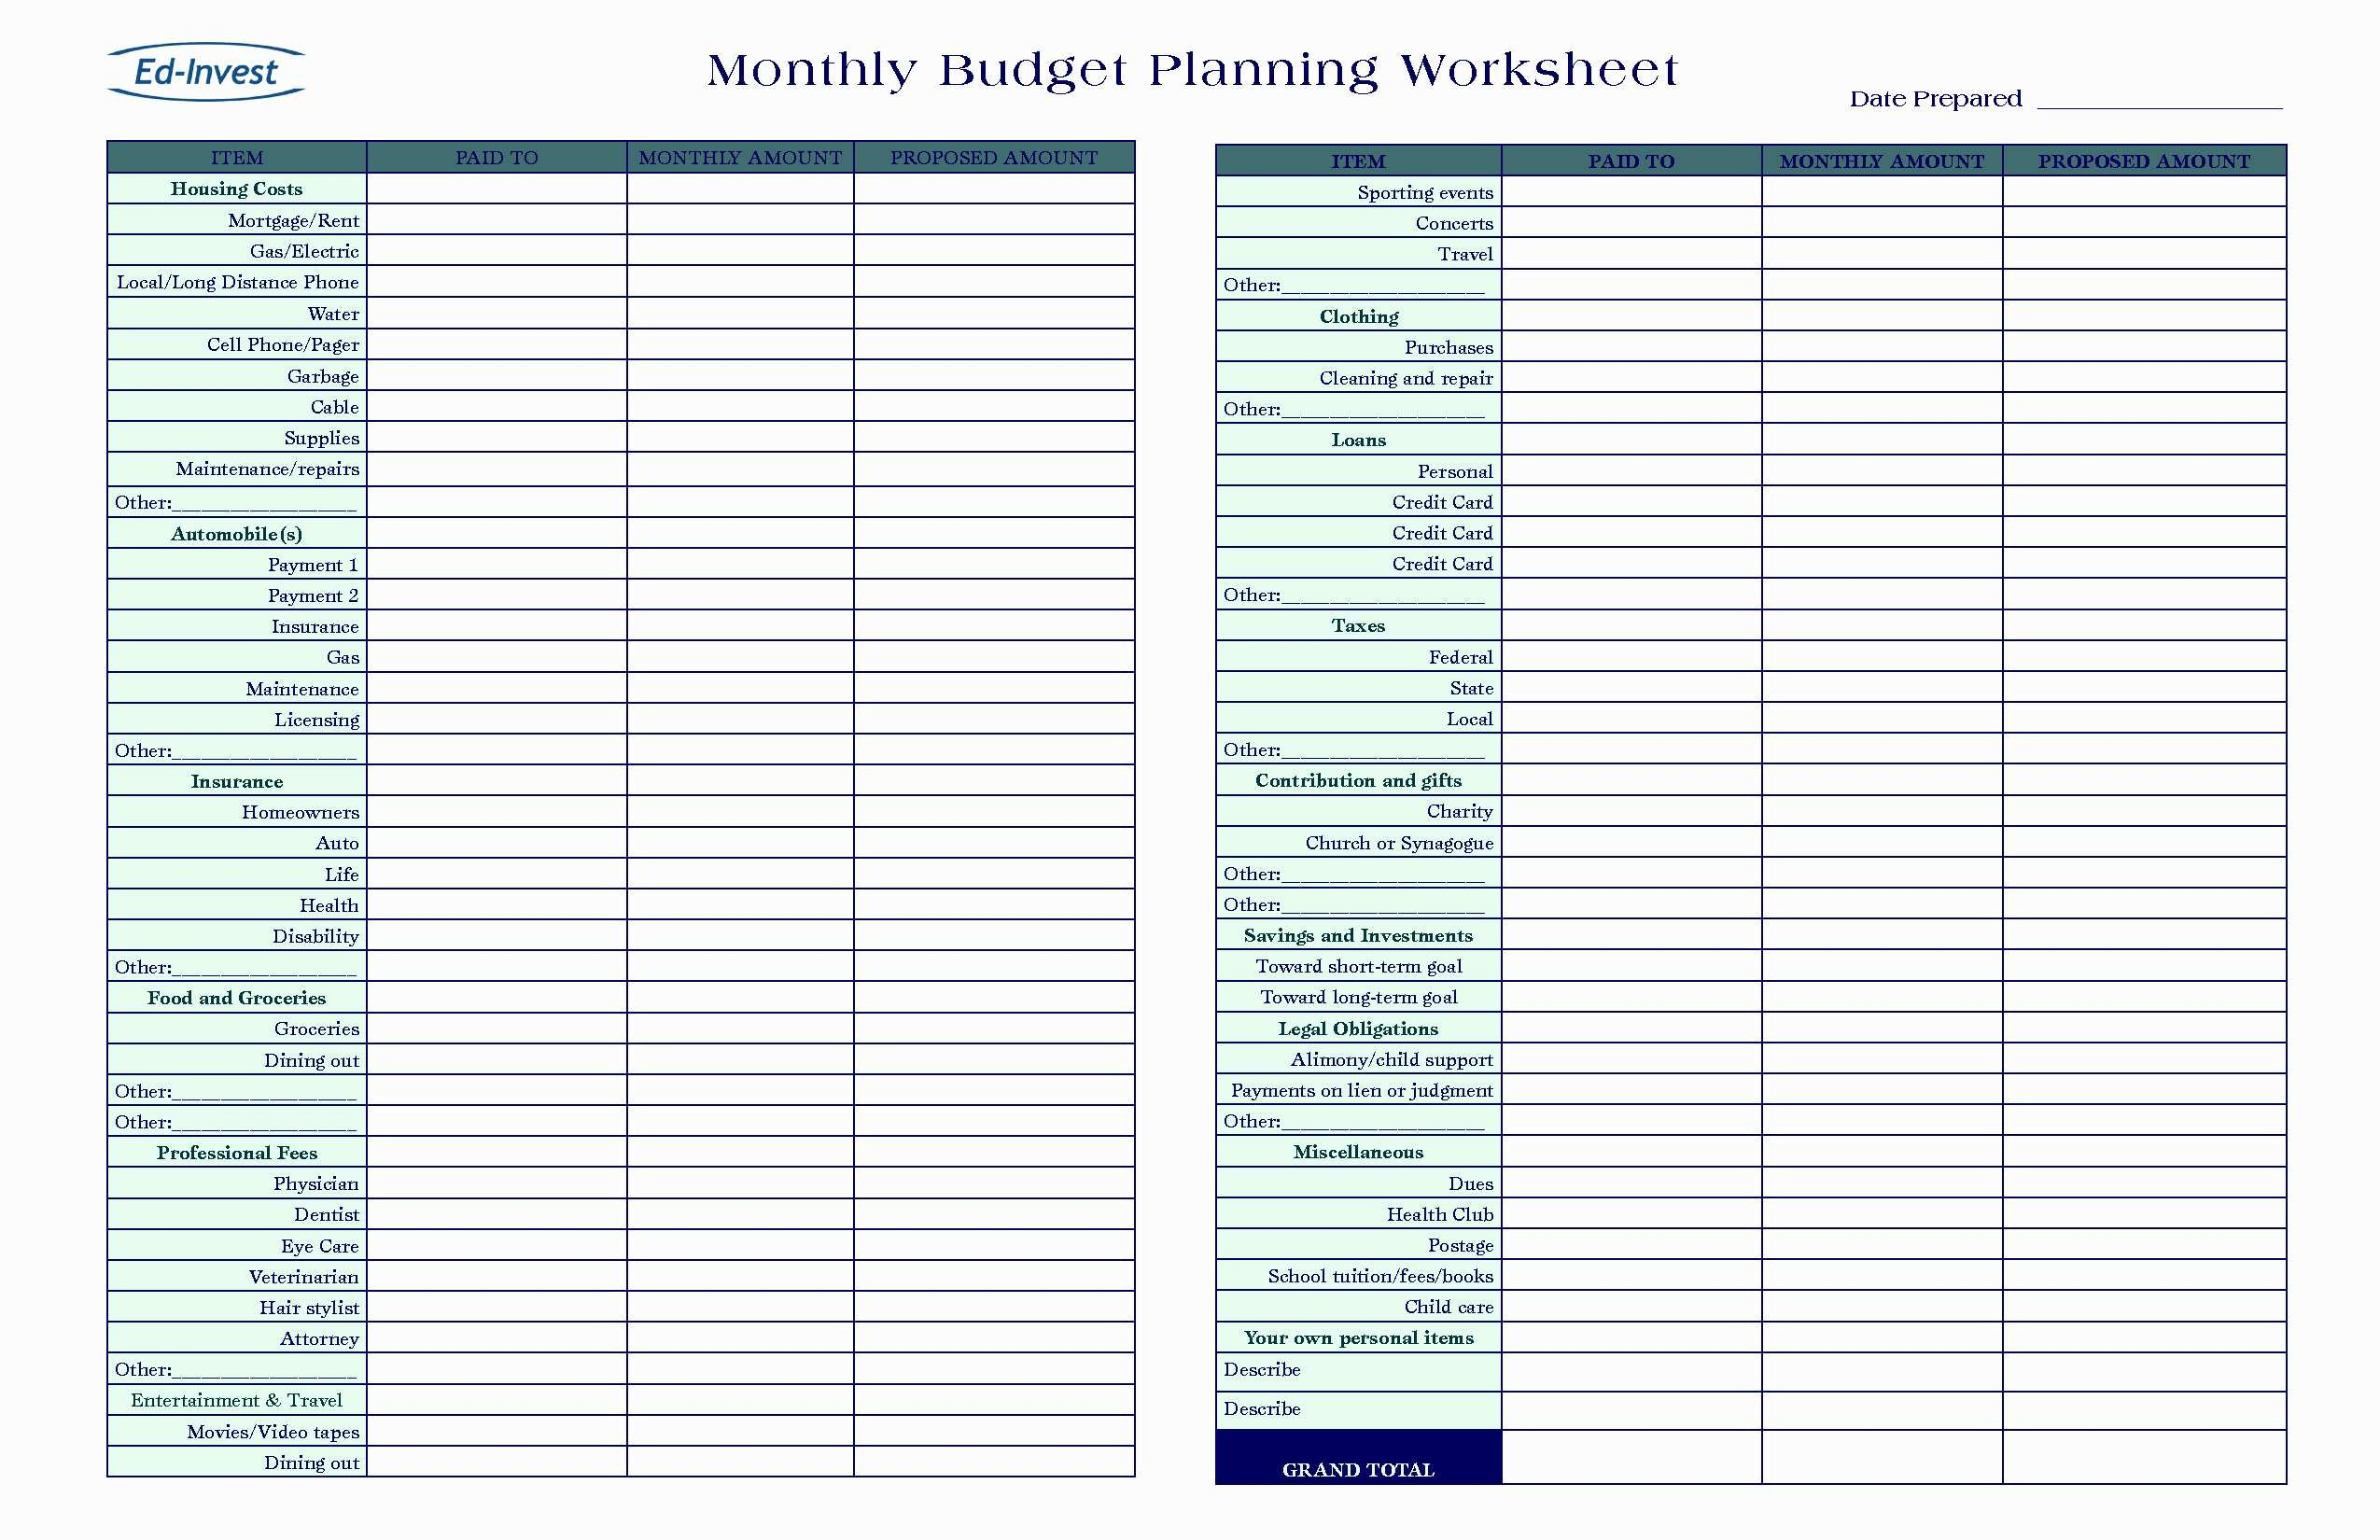 Goals Template Excel Tax Deduction Template Excel Spreadsheet Books With Excel Spreadsheet Books